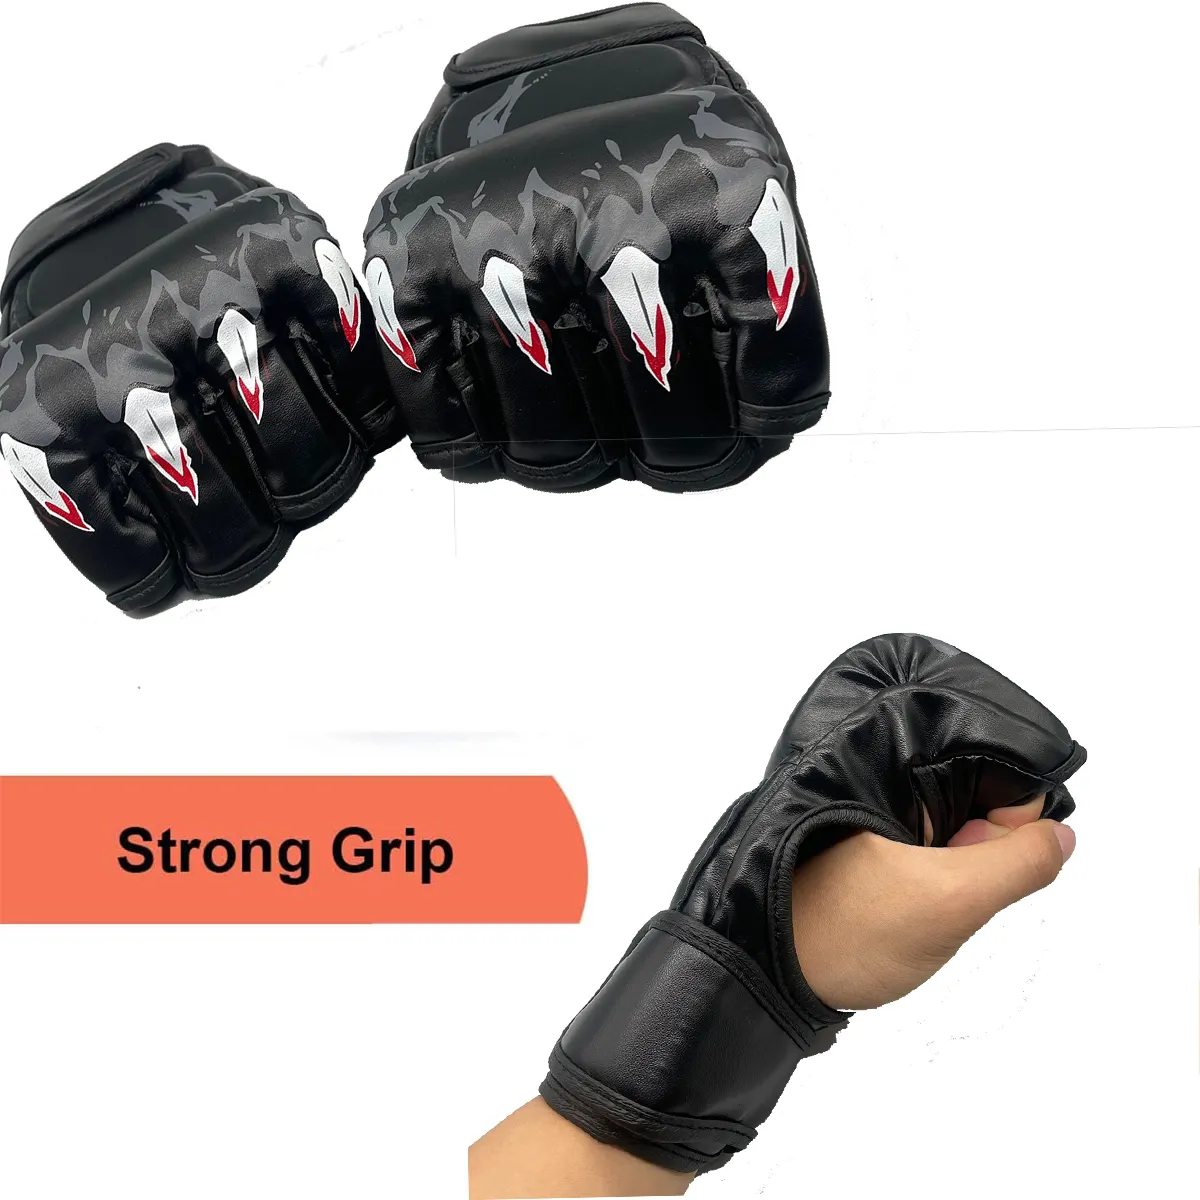 OEM MMA Sparring Gloves for Thai Training punching bag Work Open Palm Glove